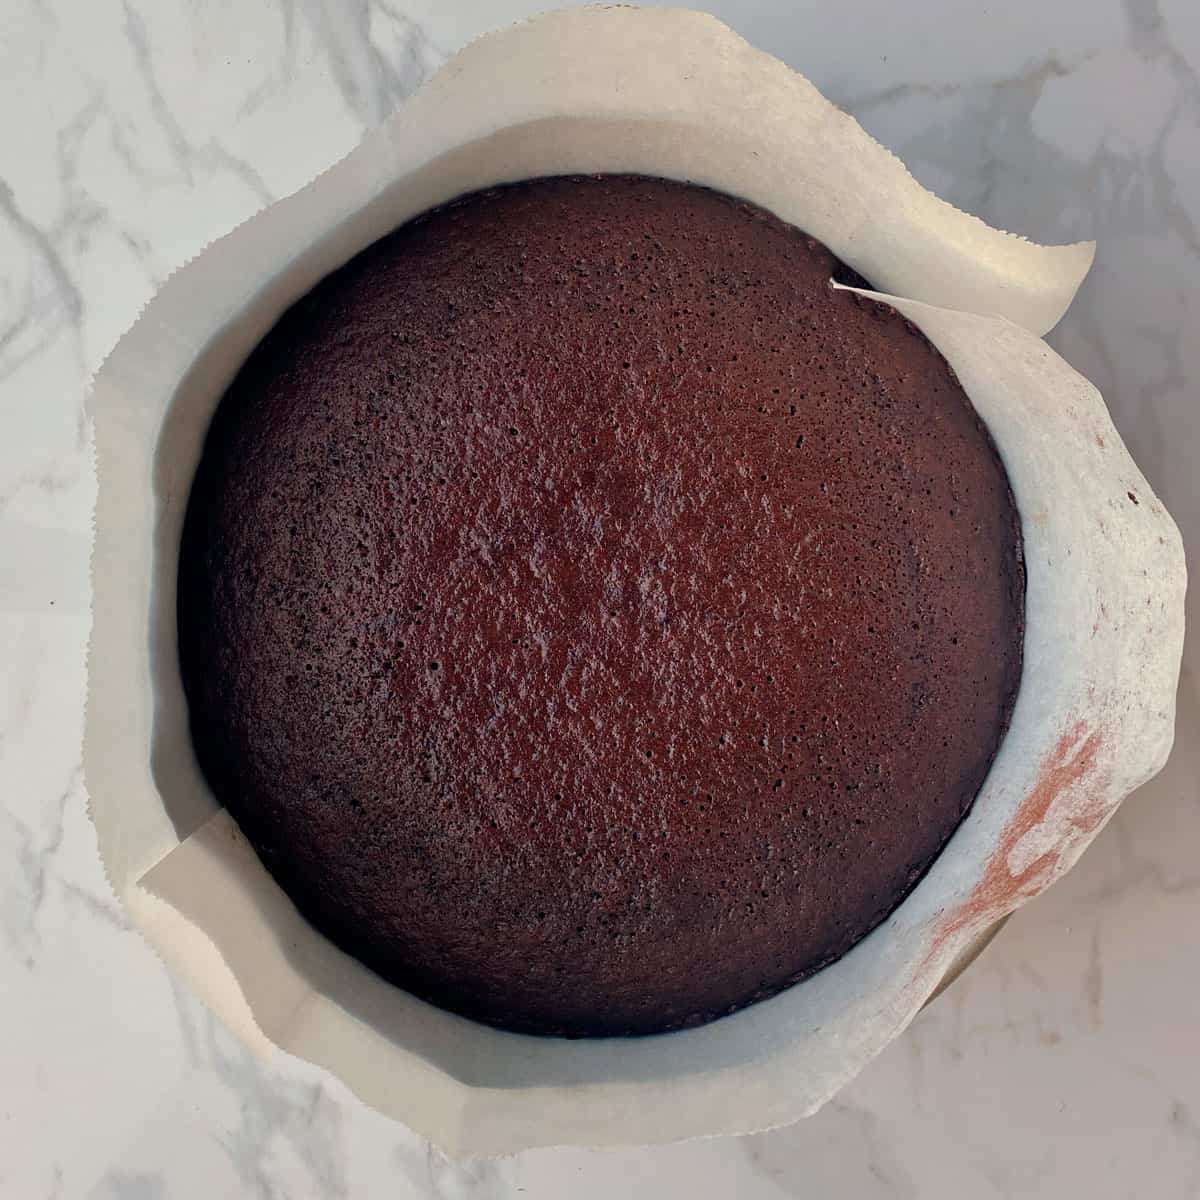 Baked chocolate cake in a lined cake tin on a bench.